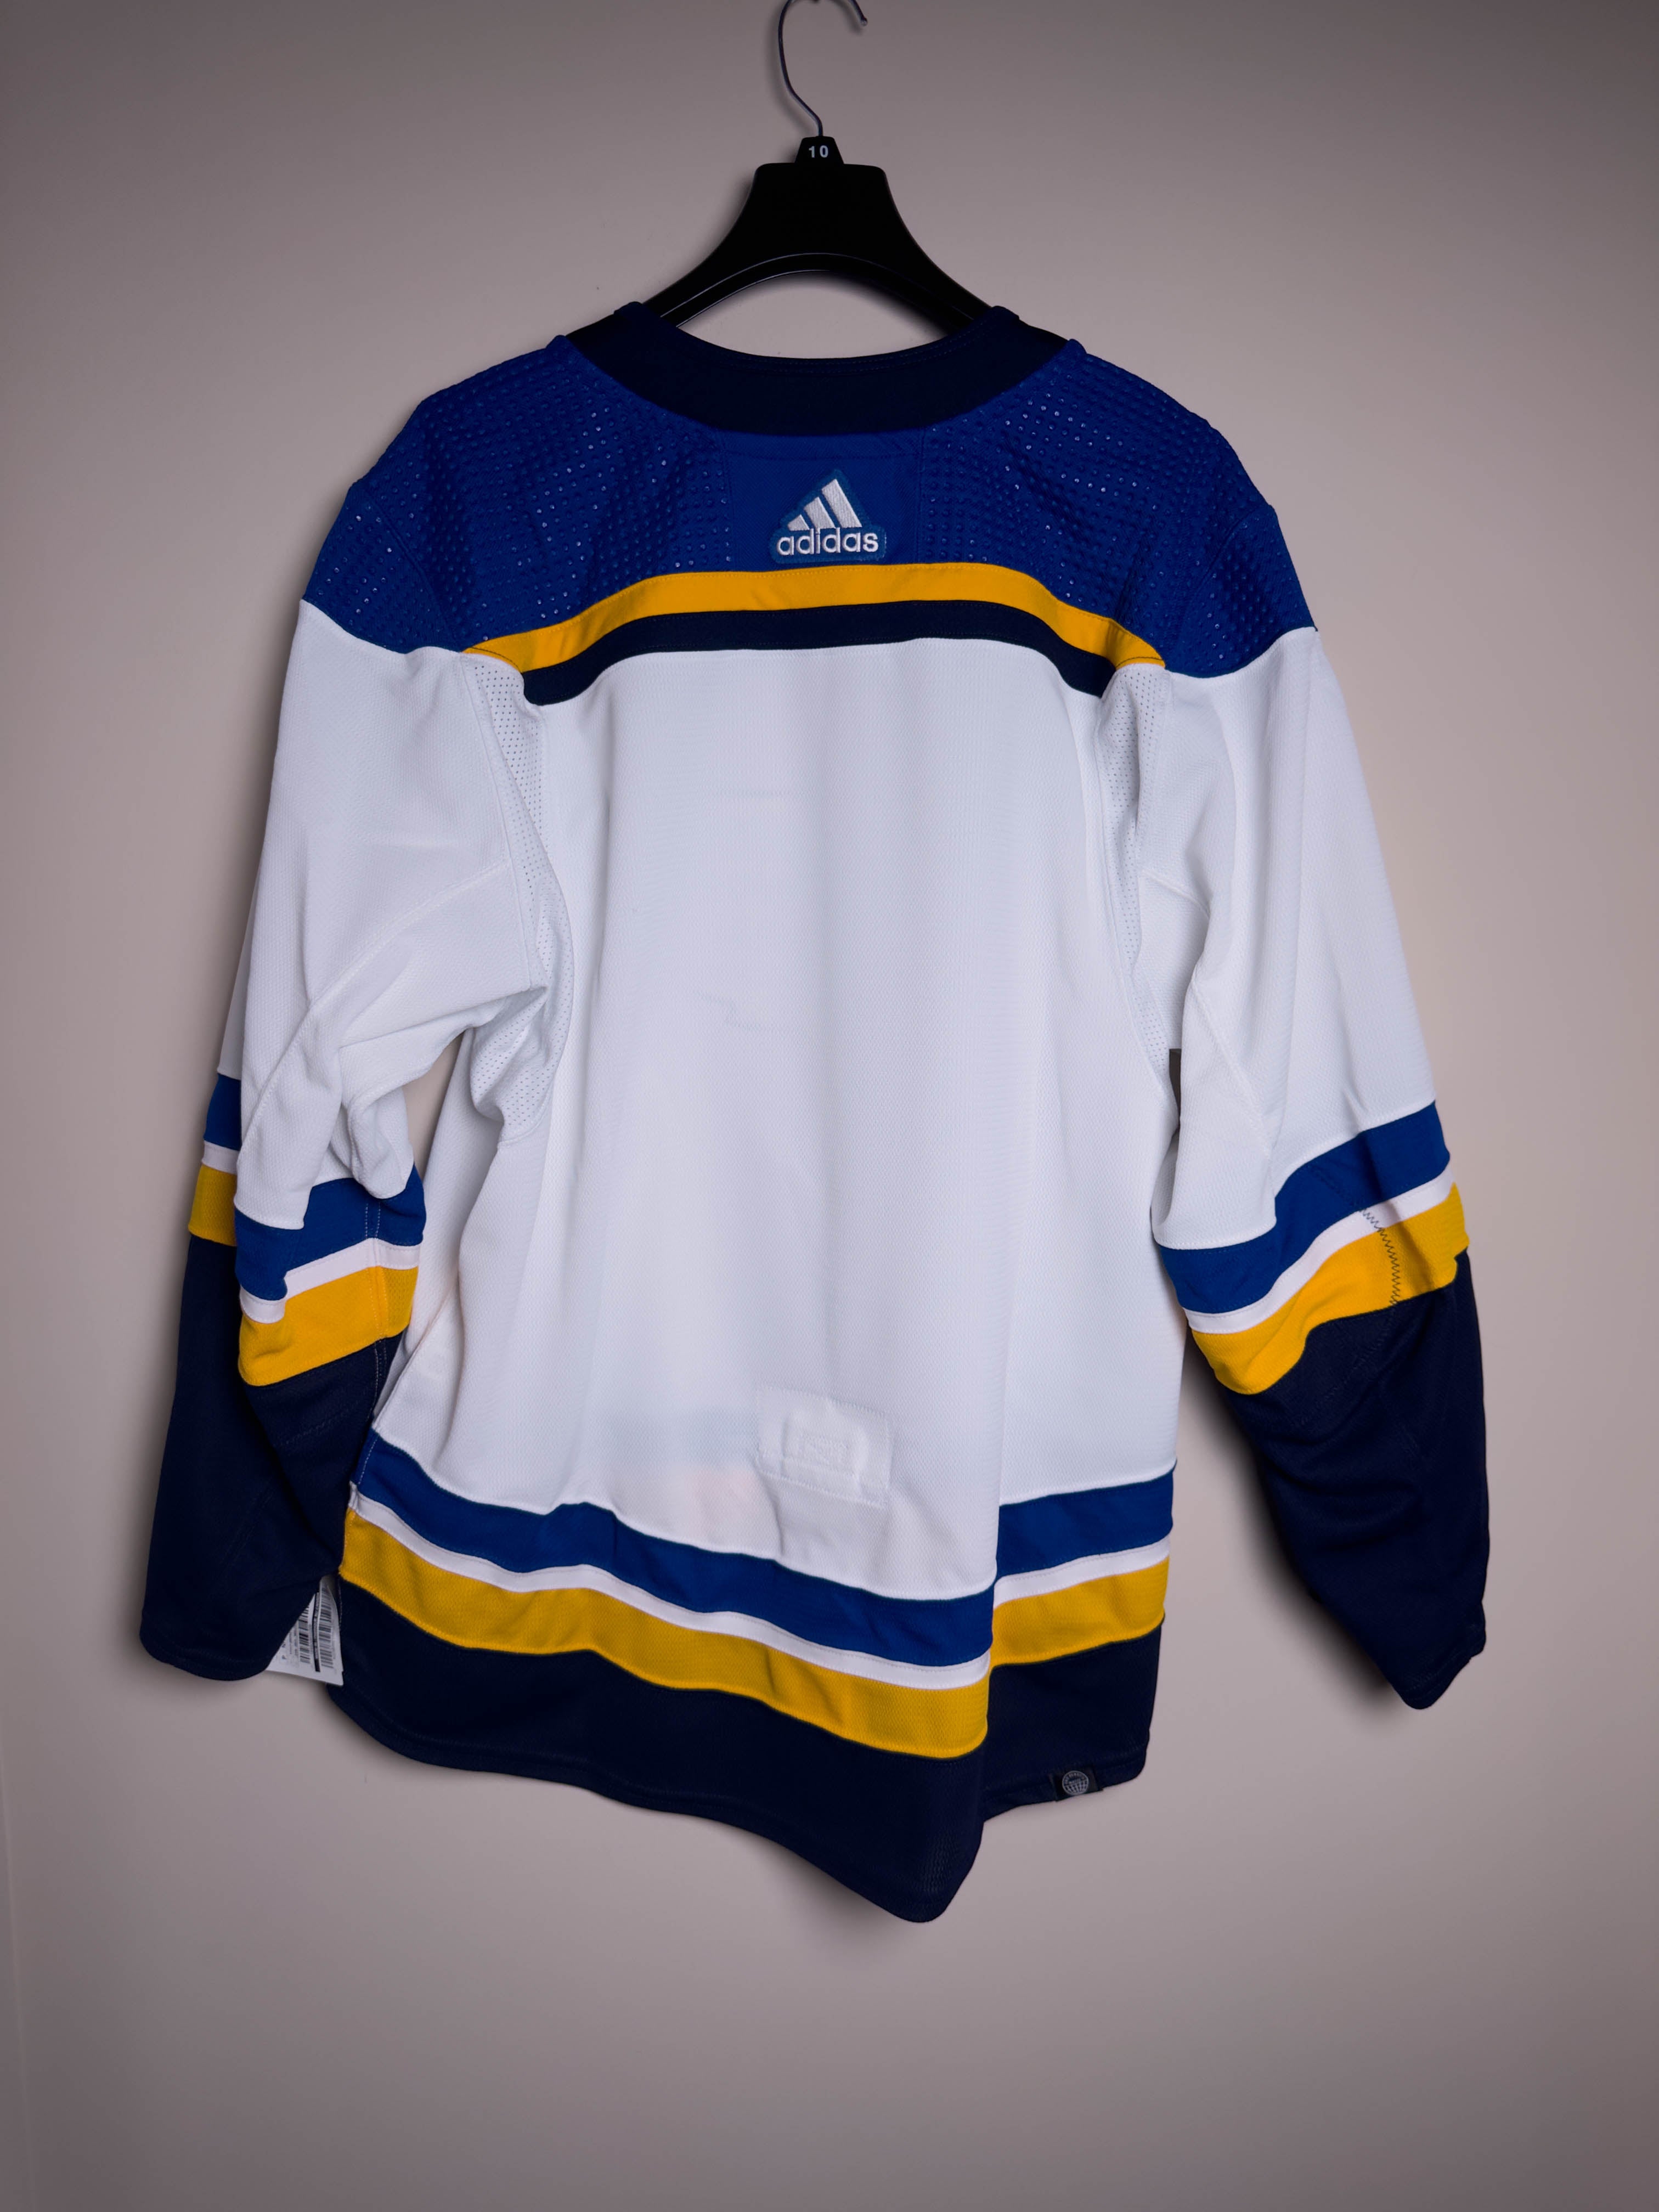 St. Louis Blues NHL Adidas MiC Team Issued Home Jersey Size 52 (Player Size)